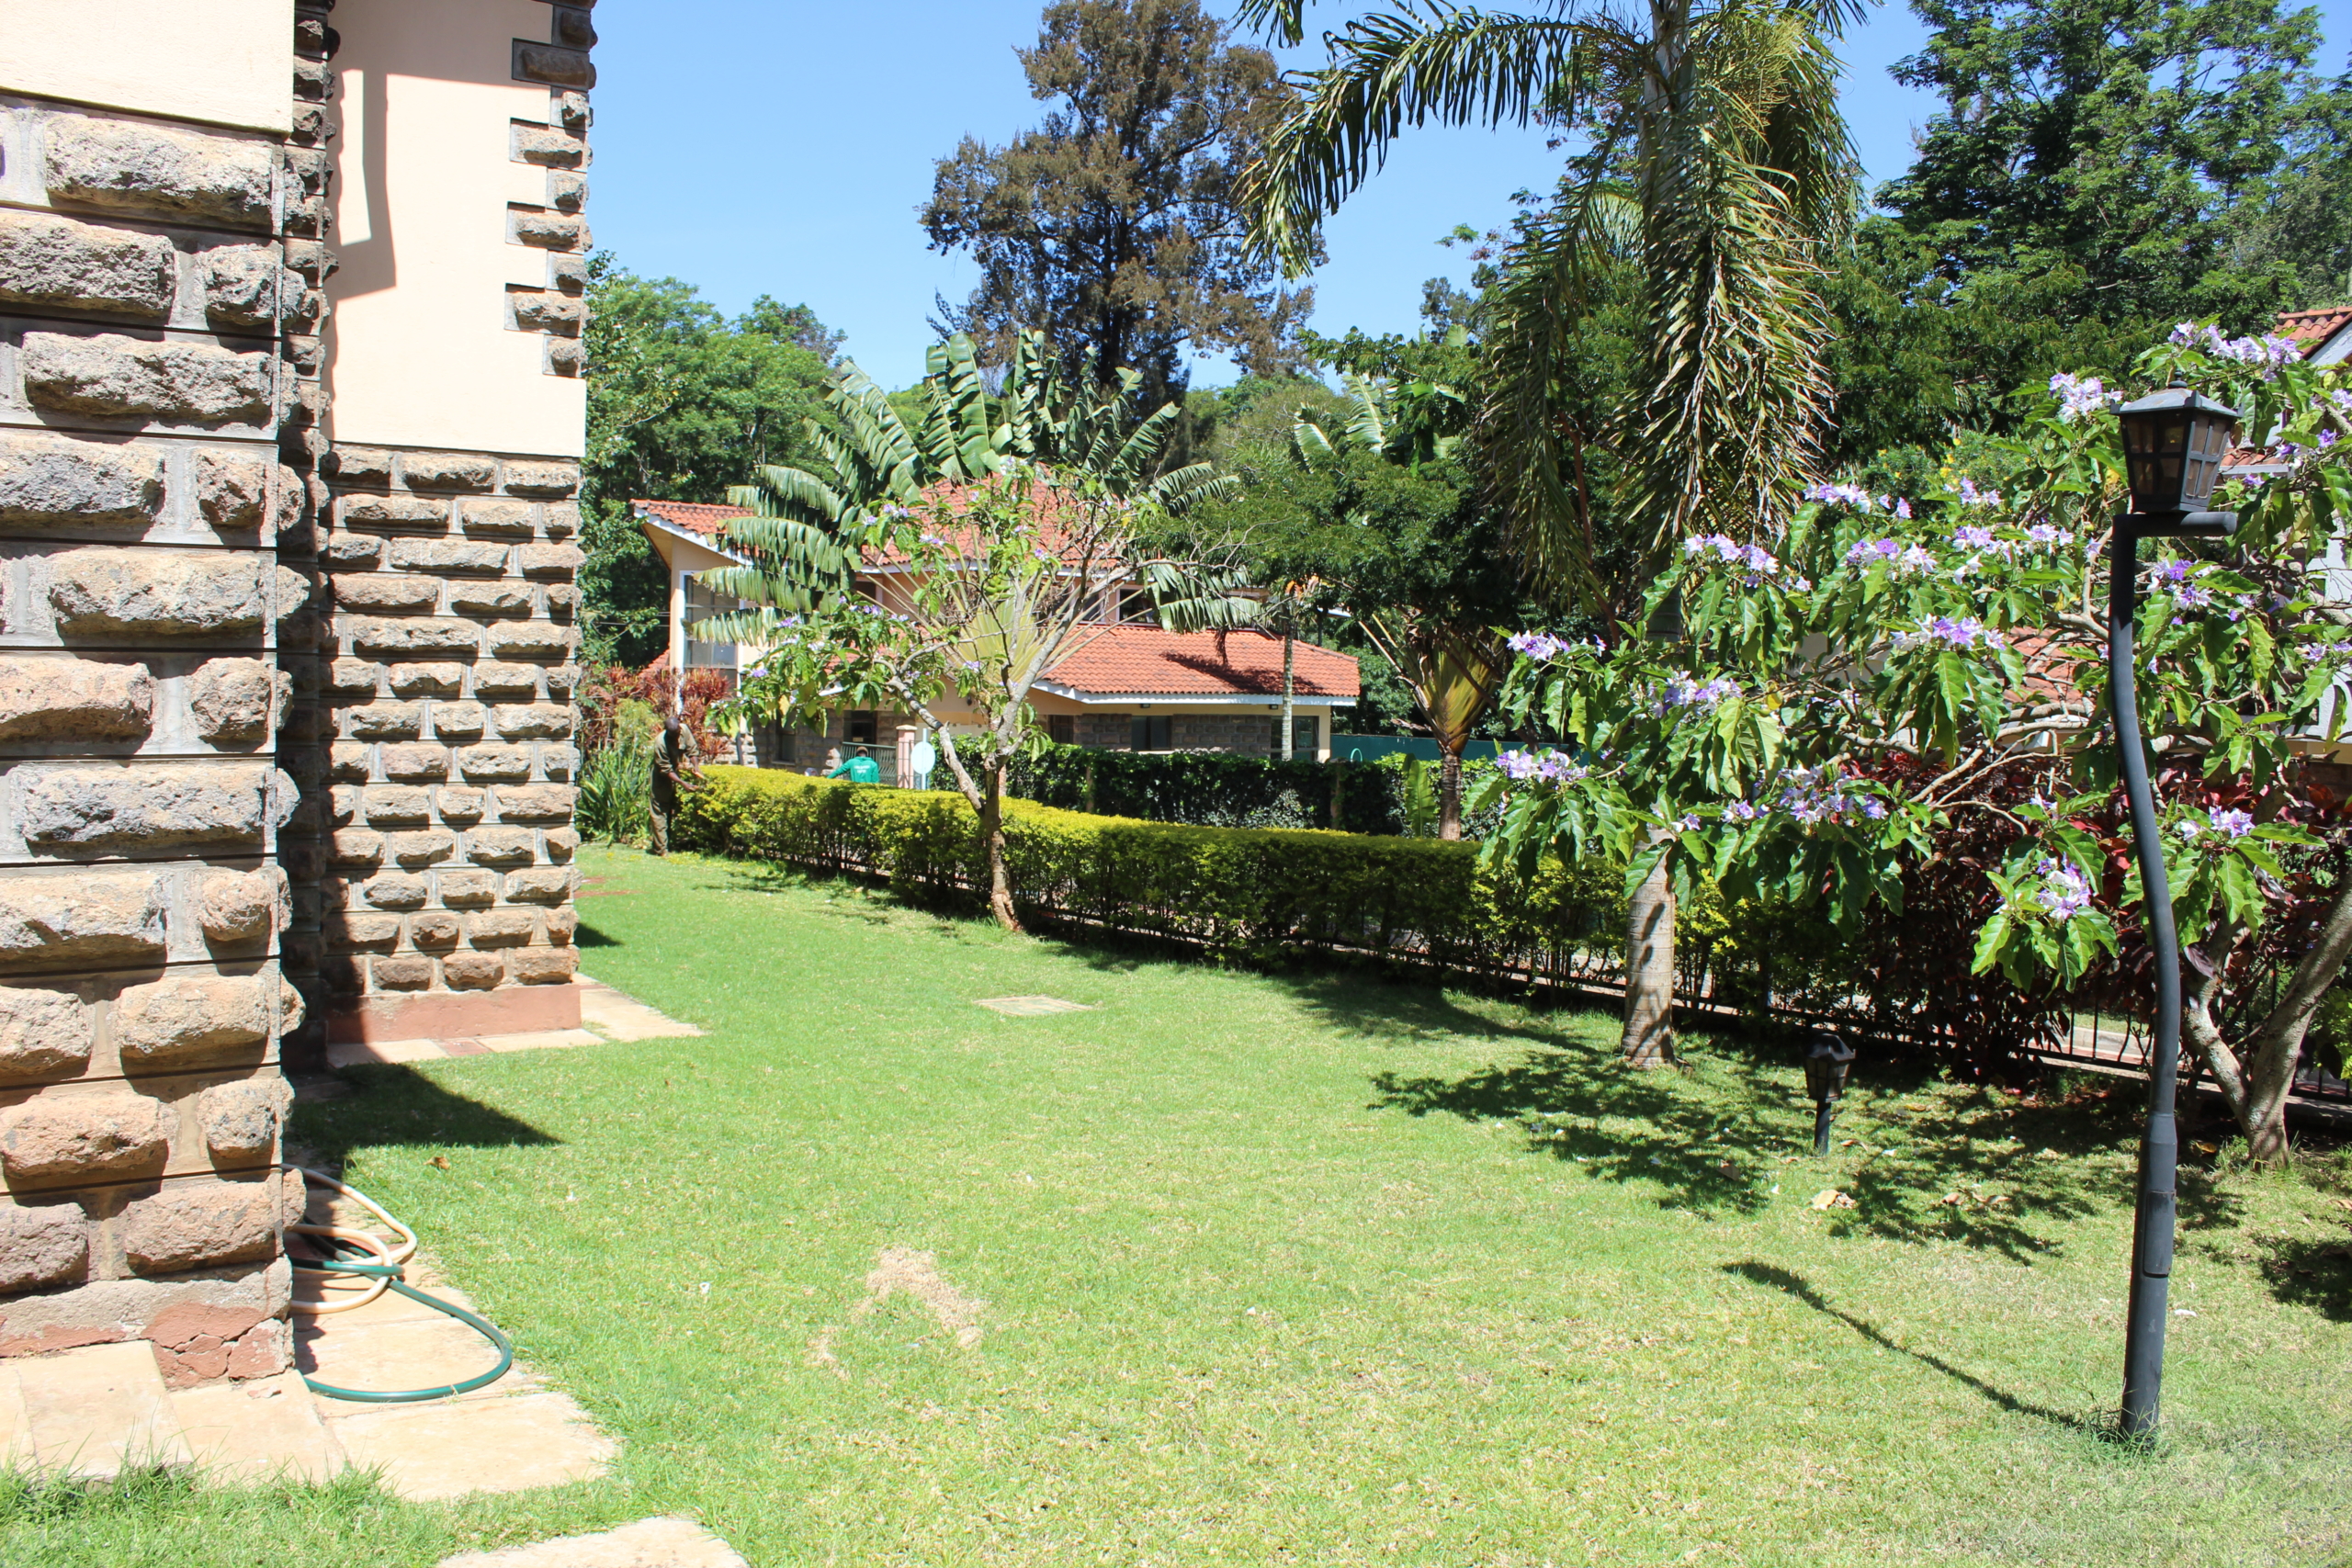 Townhouse to Let Lavington Garden and Lawn